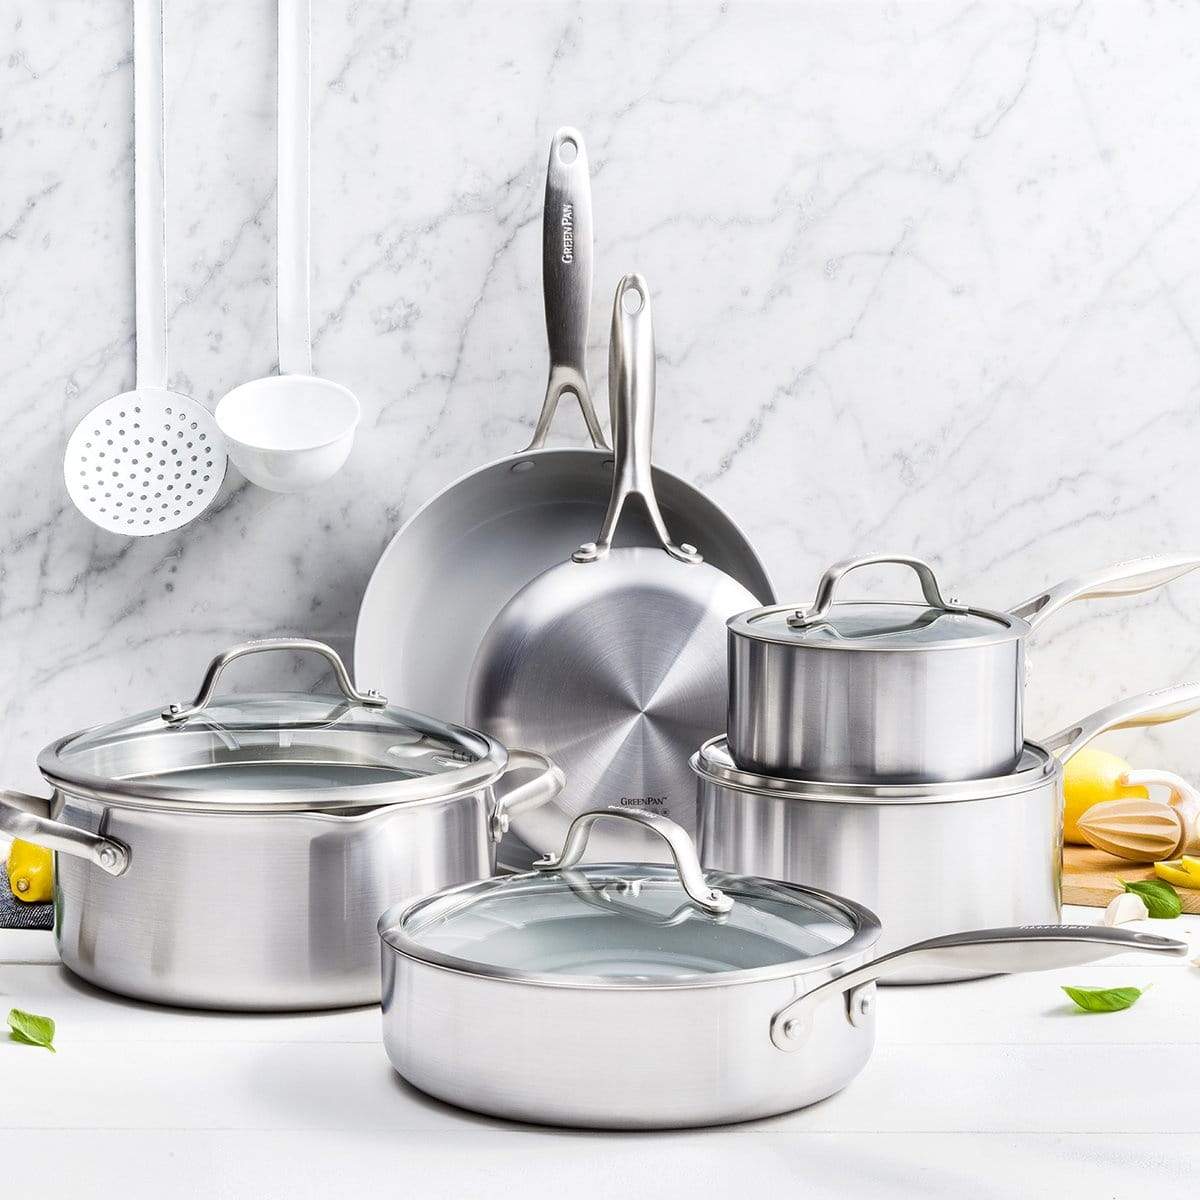 CC000018-001 - Venice Pro 10pc Cookware Sets, Stainless Steel - Product Image 2